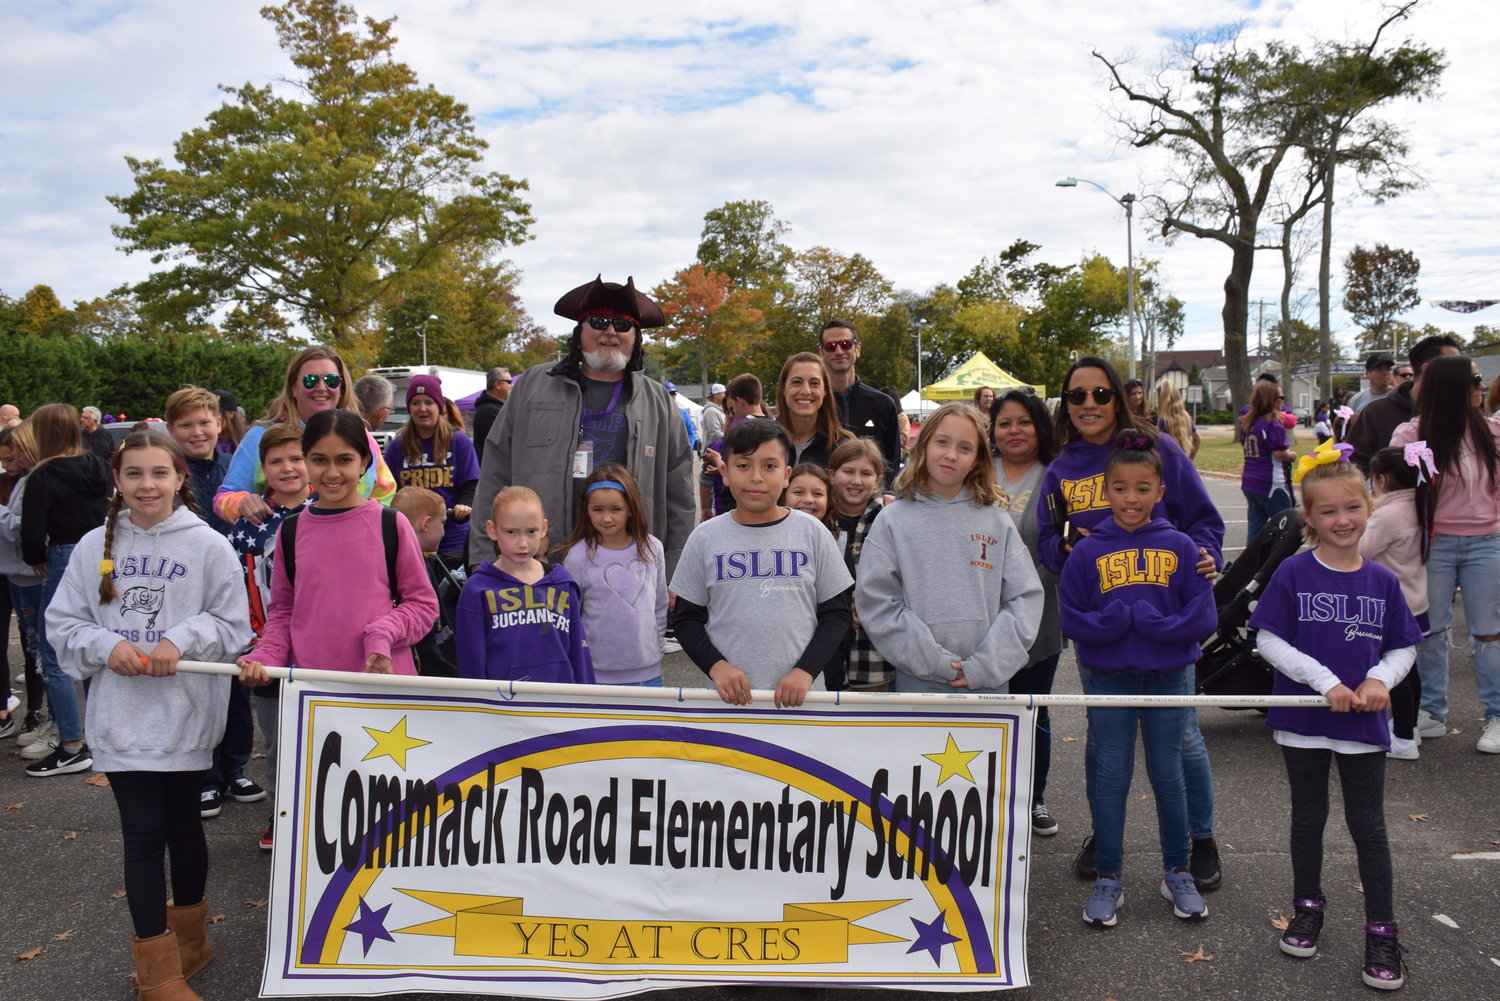 Commack Road Elementary School Principal James Cameron and students gathered at Town Hall prior to the homecoming parade to set up for their march down Main Street in Islip.